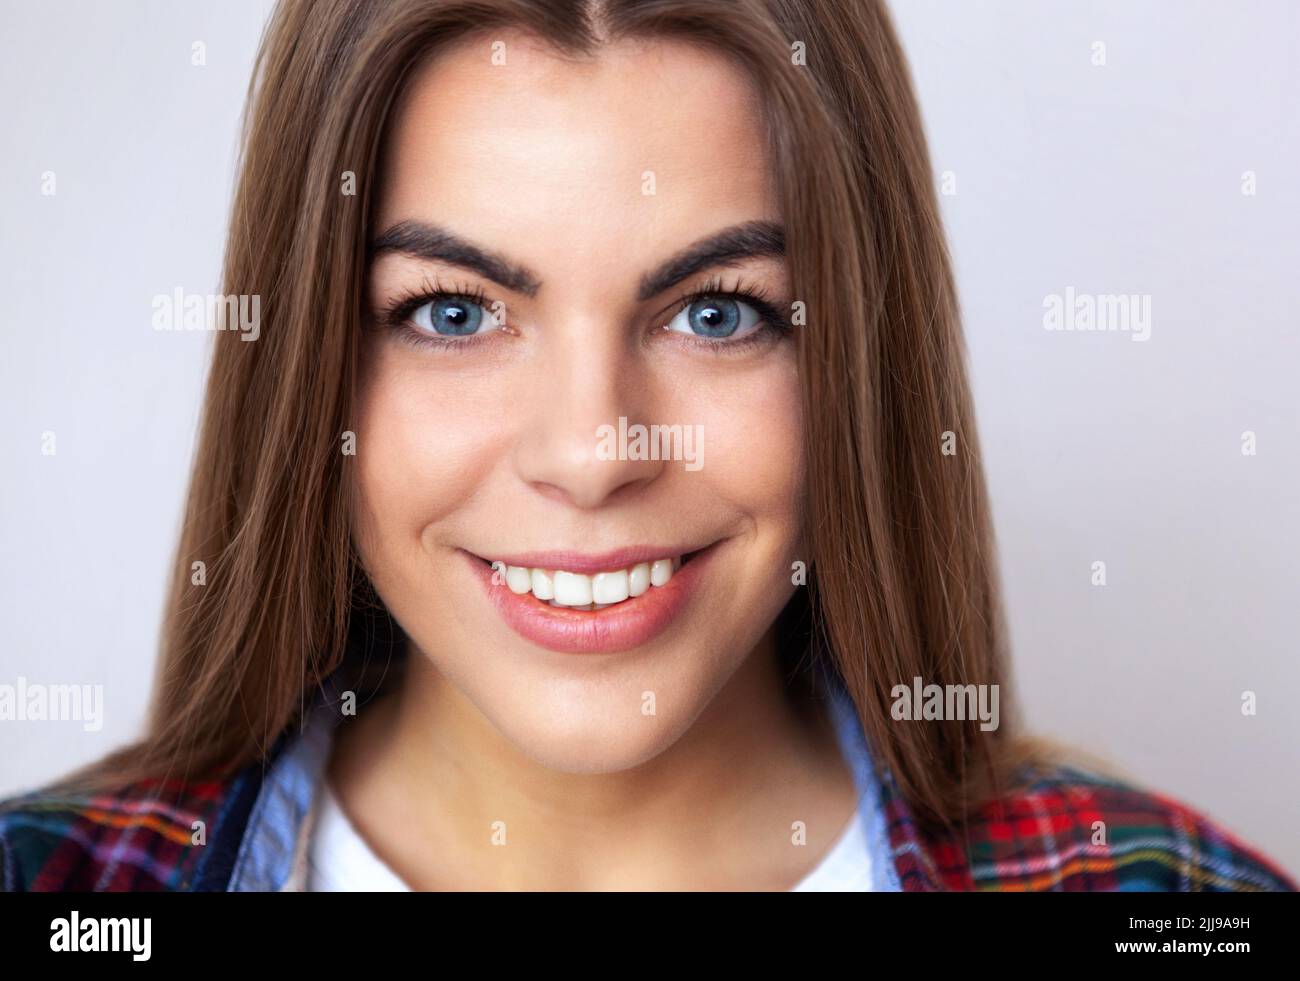 Studio portrait of happy young woman in plaid shirt posing against wall. Stock Photo